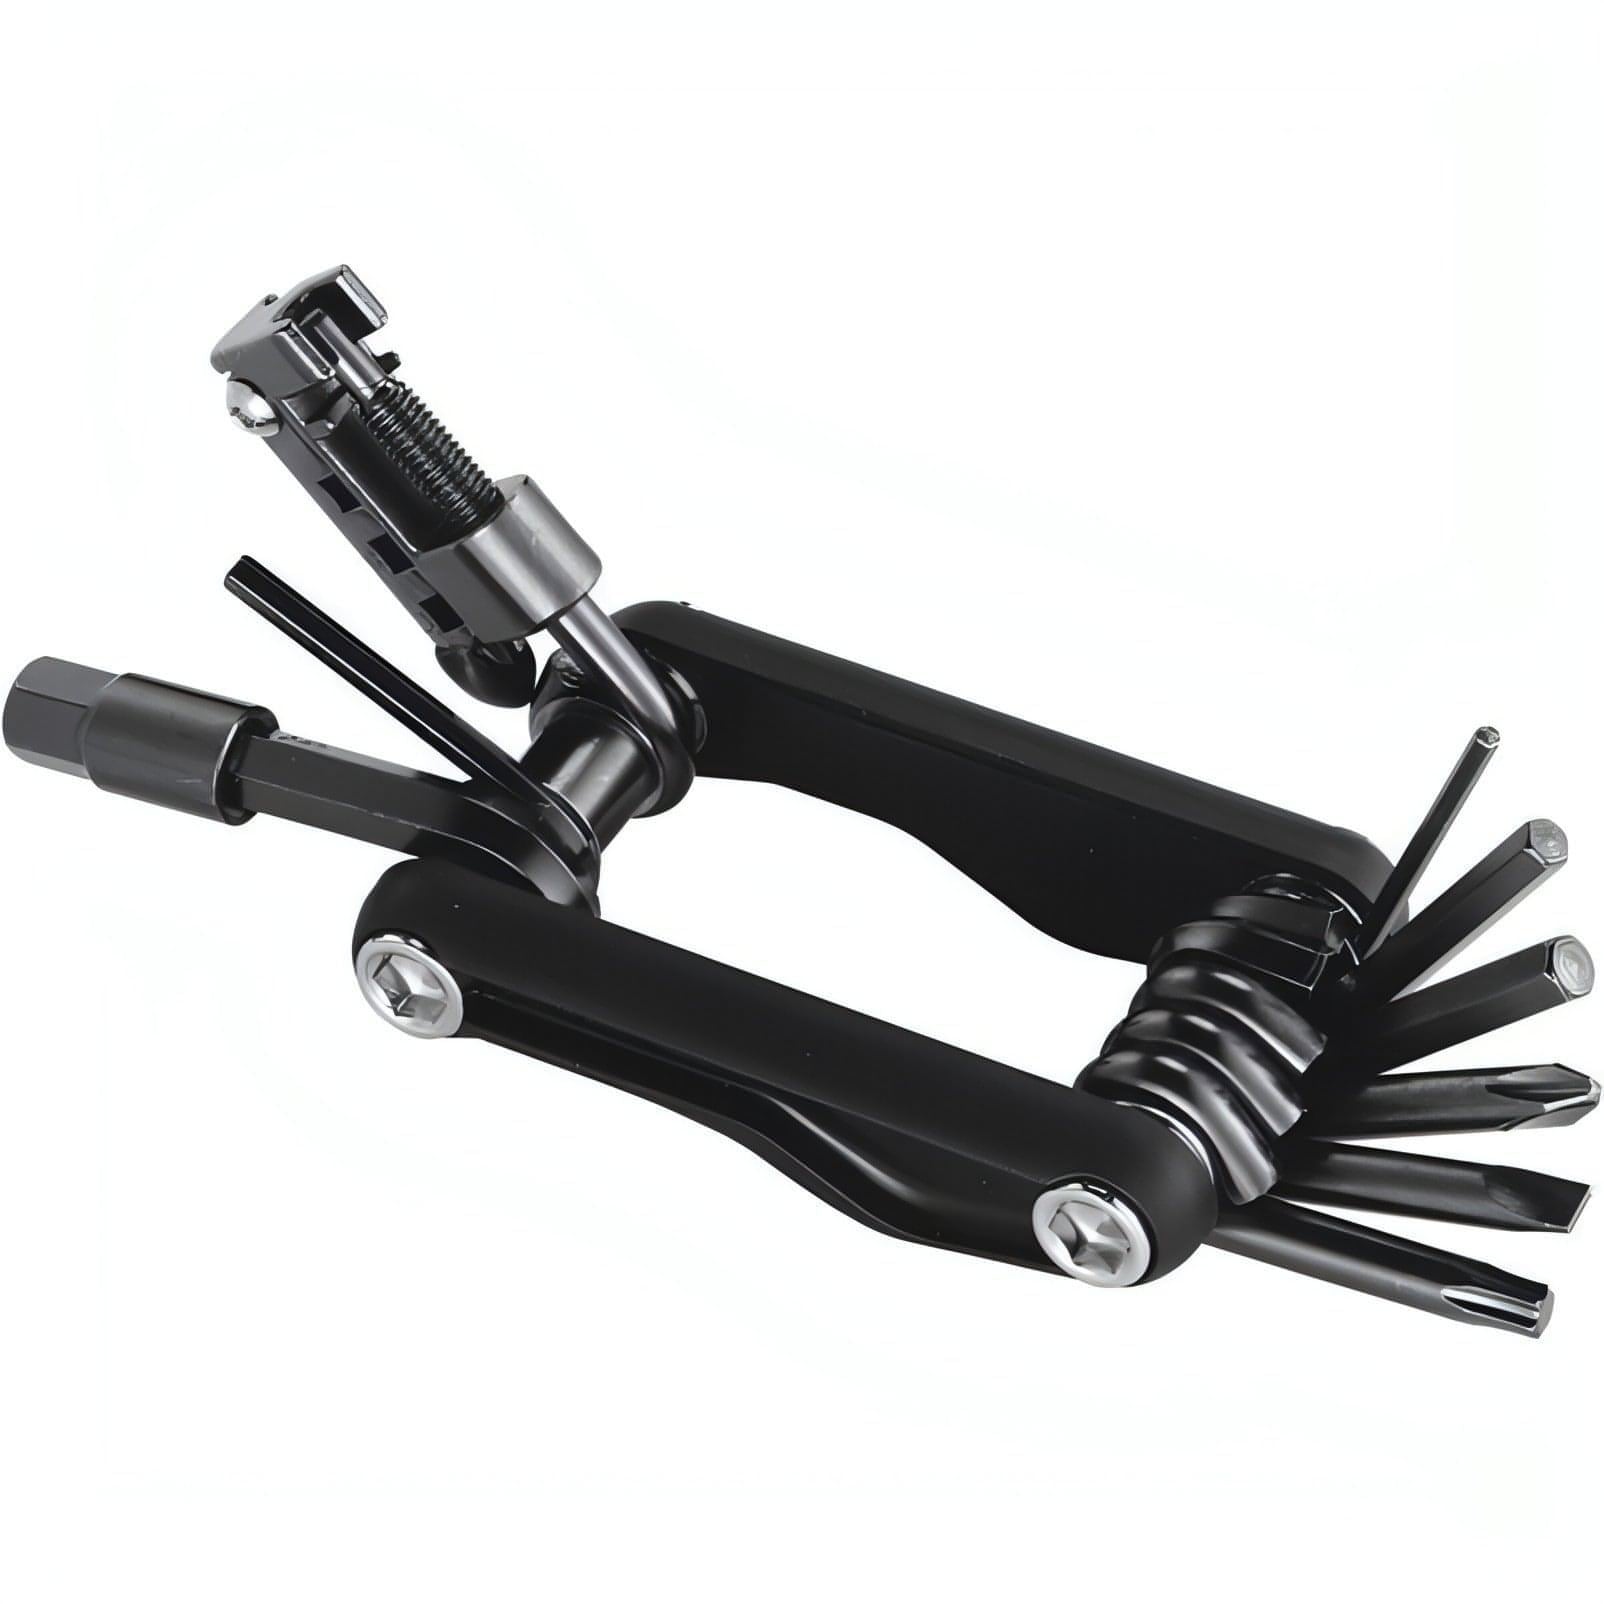 Syncros Composite 14CT Bicycle Multi Tool - Black 7613257560949 - Start Fitness